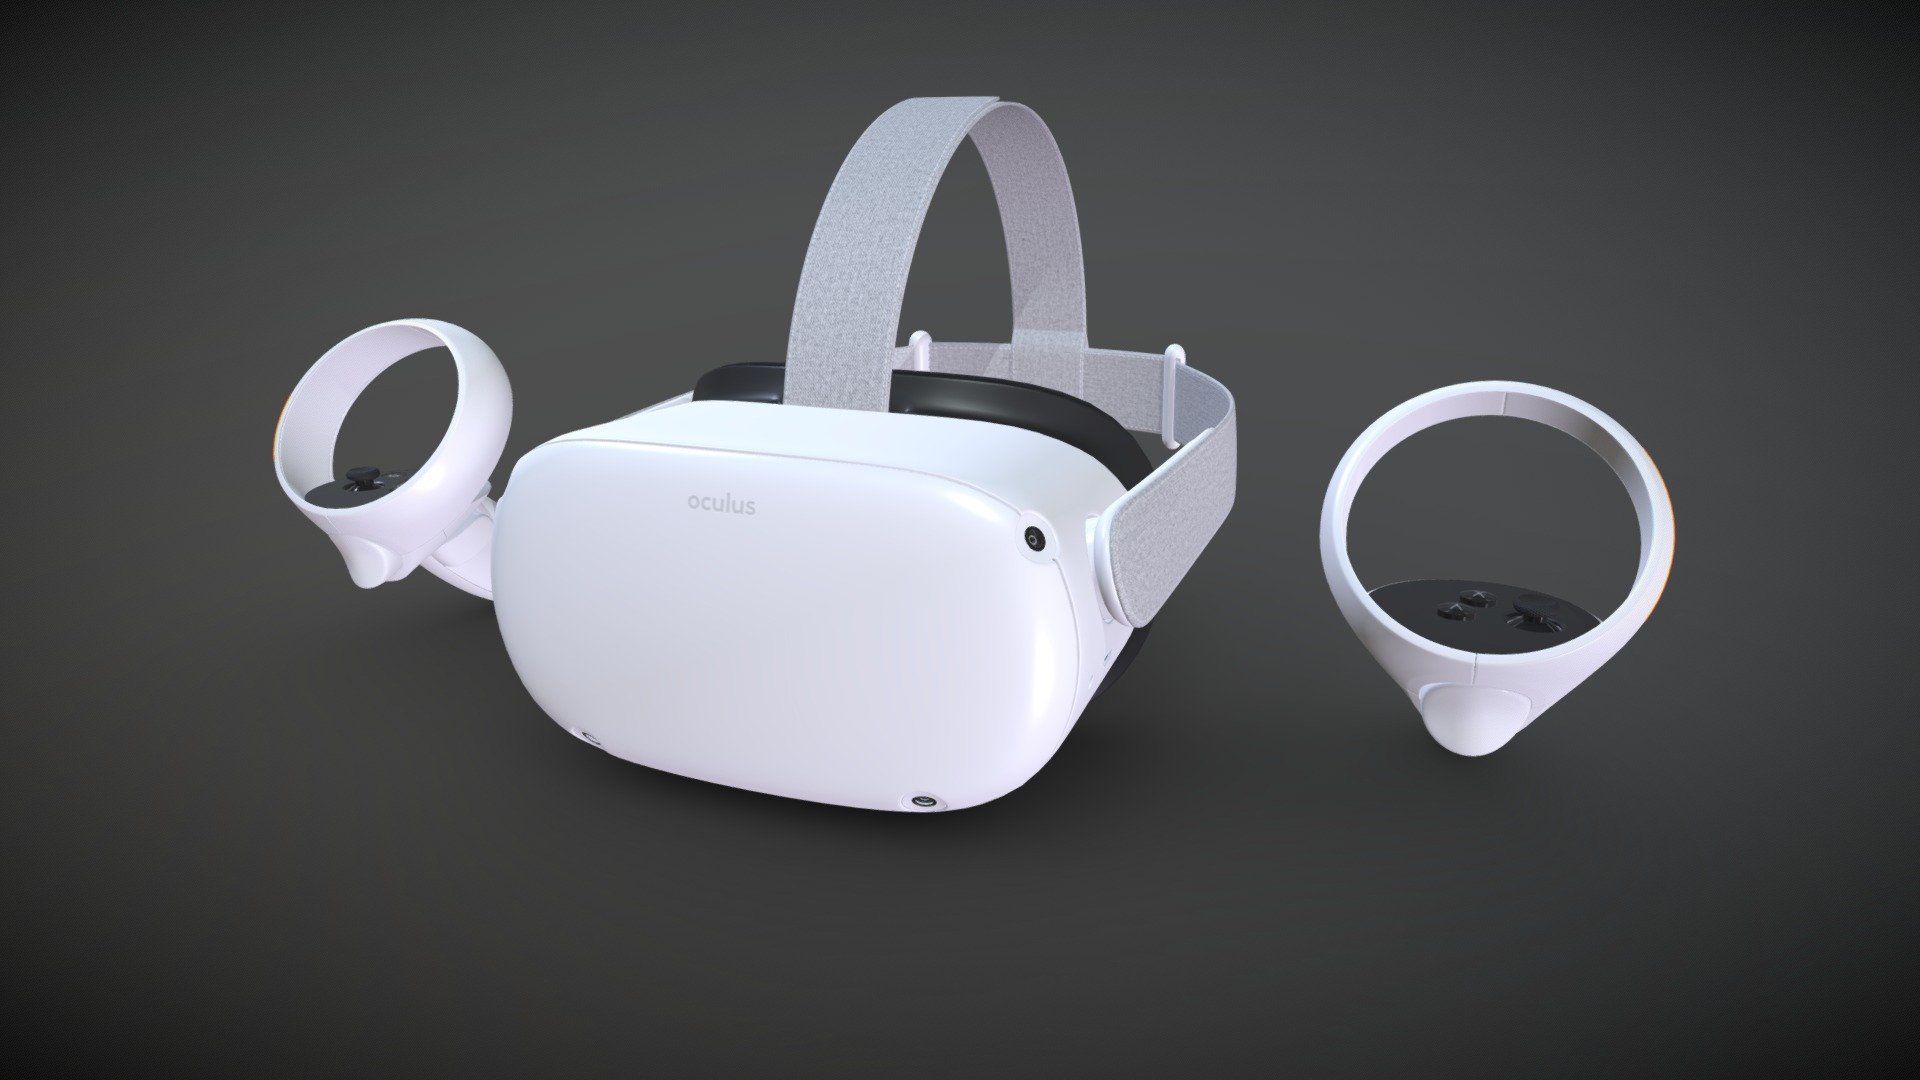 Oculus Quest 2 (Now Meta Quest 2) VR Headset with Controllers

[Technical Information]


Real world scale.
All geometry is subdivision ready.
Polycount at subdiv Lv. 0: 13,502.
Polycount at subdiv Lv. 1: 53,953.
Polycount at subdiv Lv. 2: 215,812.
Fully unwrapped, non-overlapping UV's.
8K PBR Textures.
No N-gons, Isolated Vertices, or Complex Poles.

[Additional File Includes]

_SPP - Substance Painter project file.

_TEX - 4K Textures.

_TEX_8K - 8K Textures.

_C4D_Octane - Cinema 4D project file with Octane shaders.

_ORBX - Octane Standalone Package with embeded textures.

_C4D - Cinema 4D project file with Physical/Standard shaders.

_FBX - Autodesk FBX exported from C4D.

_OBJ - OBJ/MTL exported from Cinema 4D. Three versions: subdiv Lv. 0 / 1 / 2.

_E3D - Ready to use in Video Copilot's Element 3D.

Extra formats: max, dae, usdz, gltf/.glb, uasset 3d model